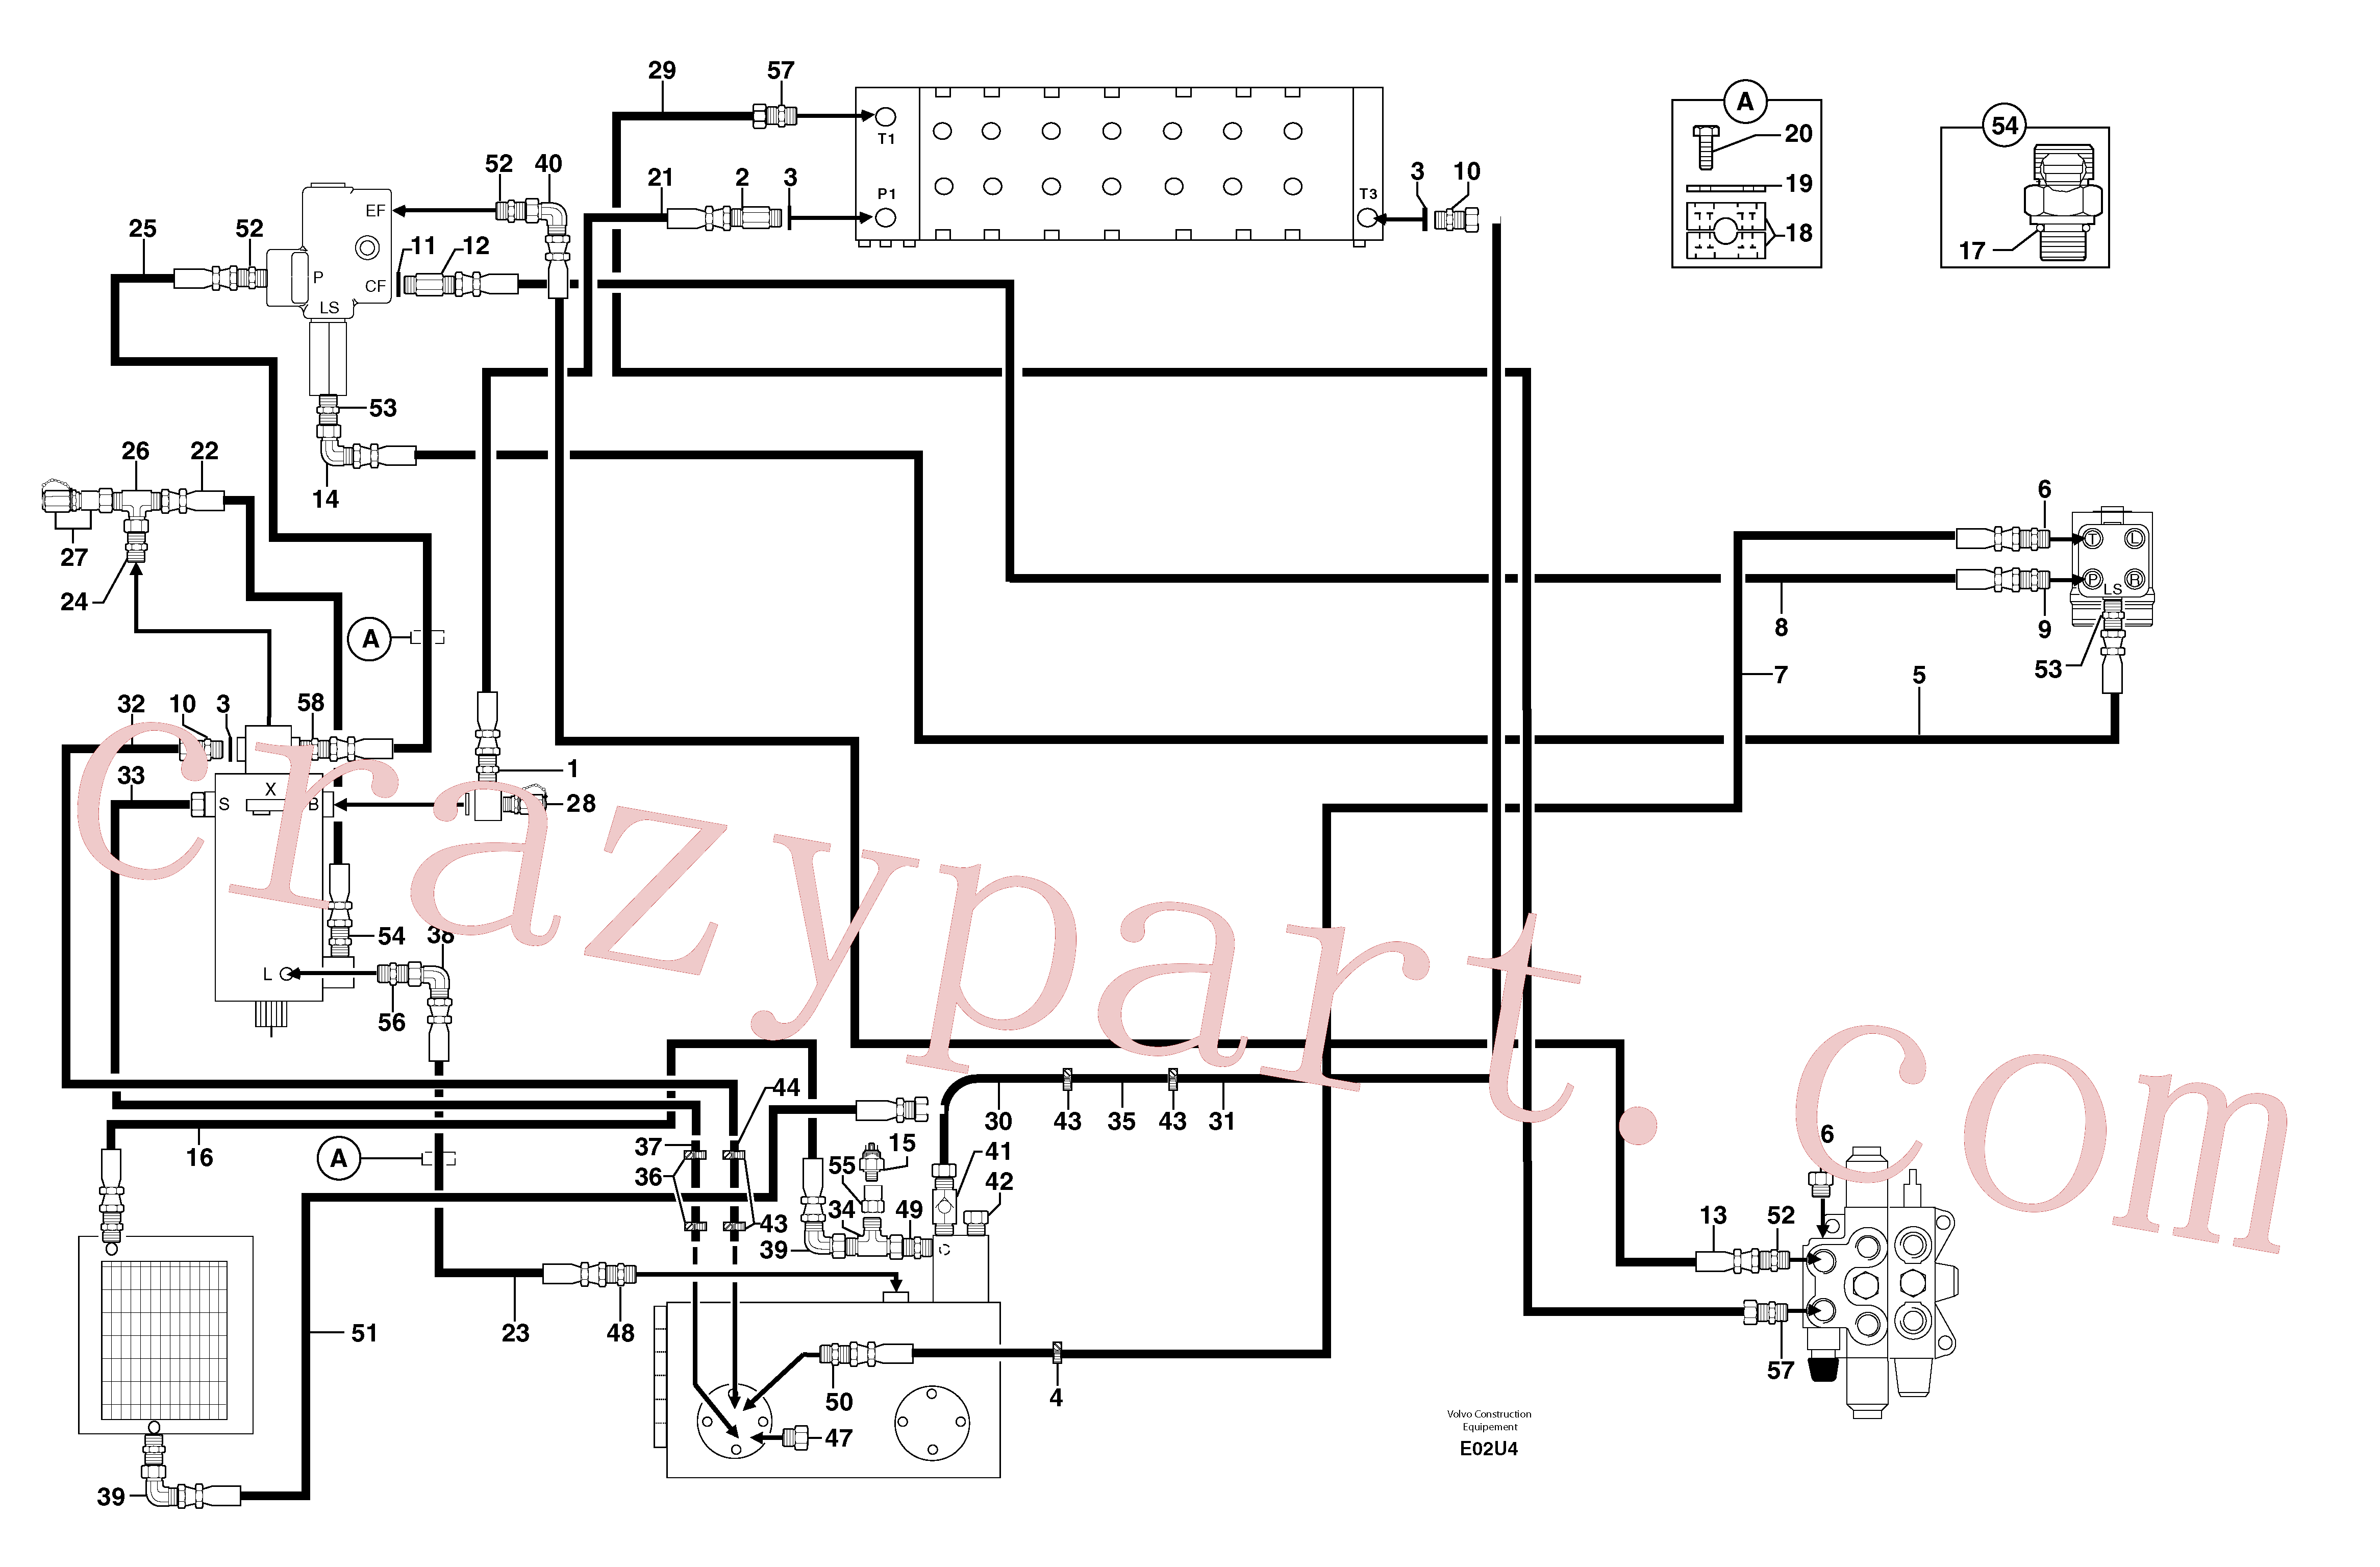 PJ4750577 for Volvo Attachments supply and return circuit(E02U4 assembly)